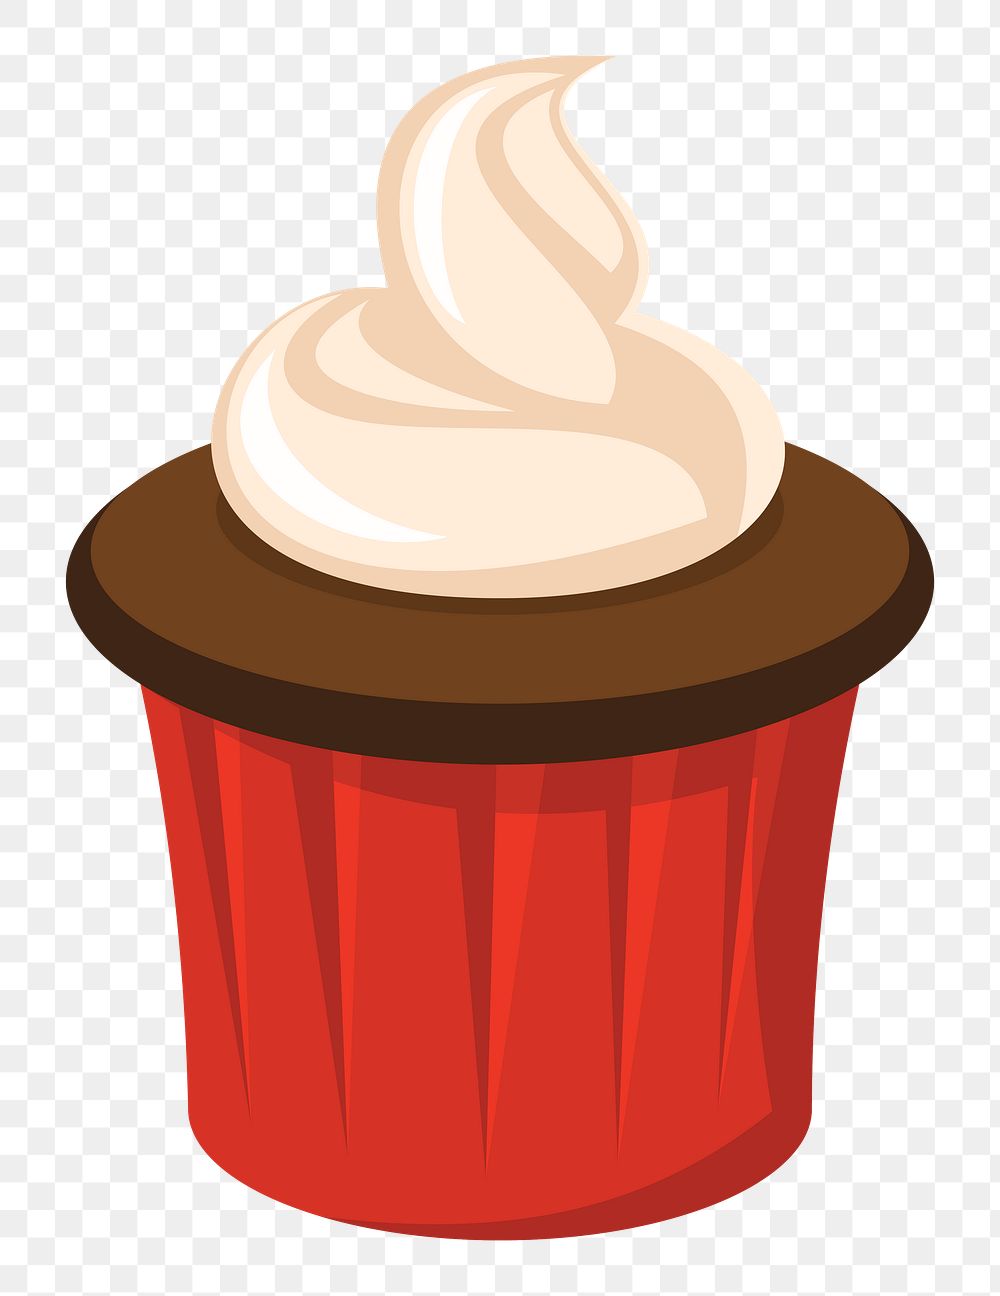 Chocolate cup cake png illustration, transparent background. Free public domain CC0 image.